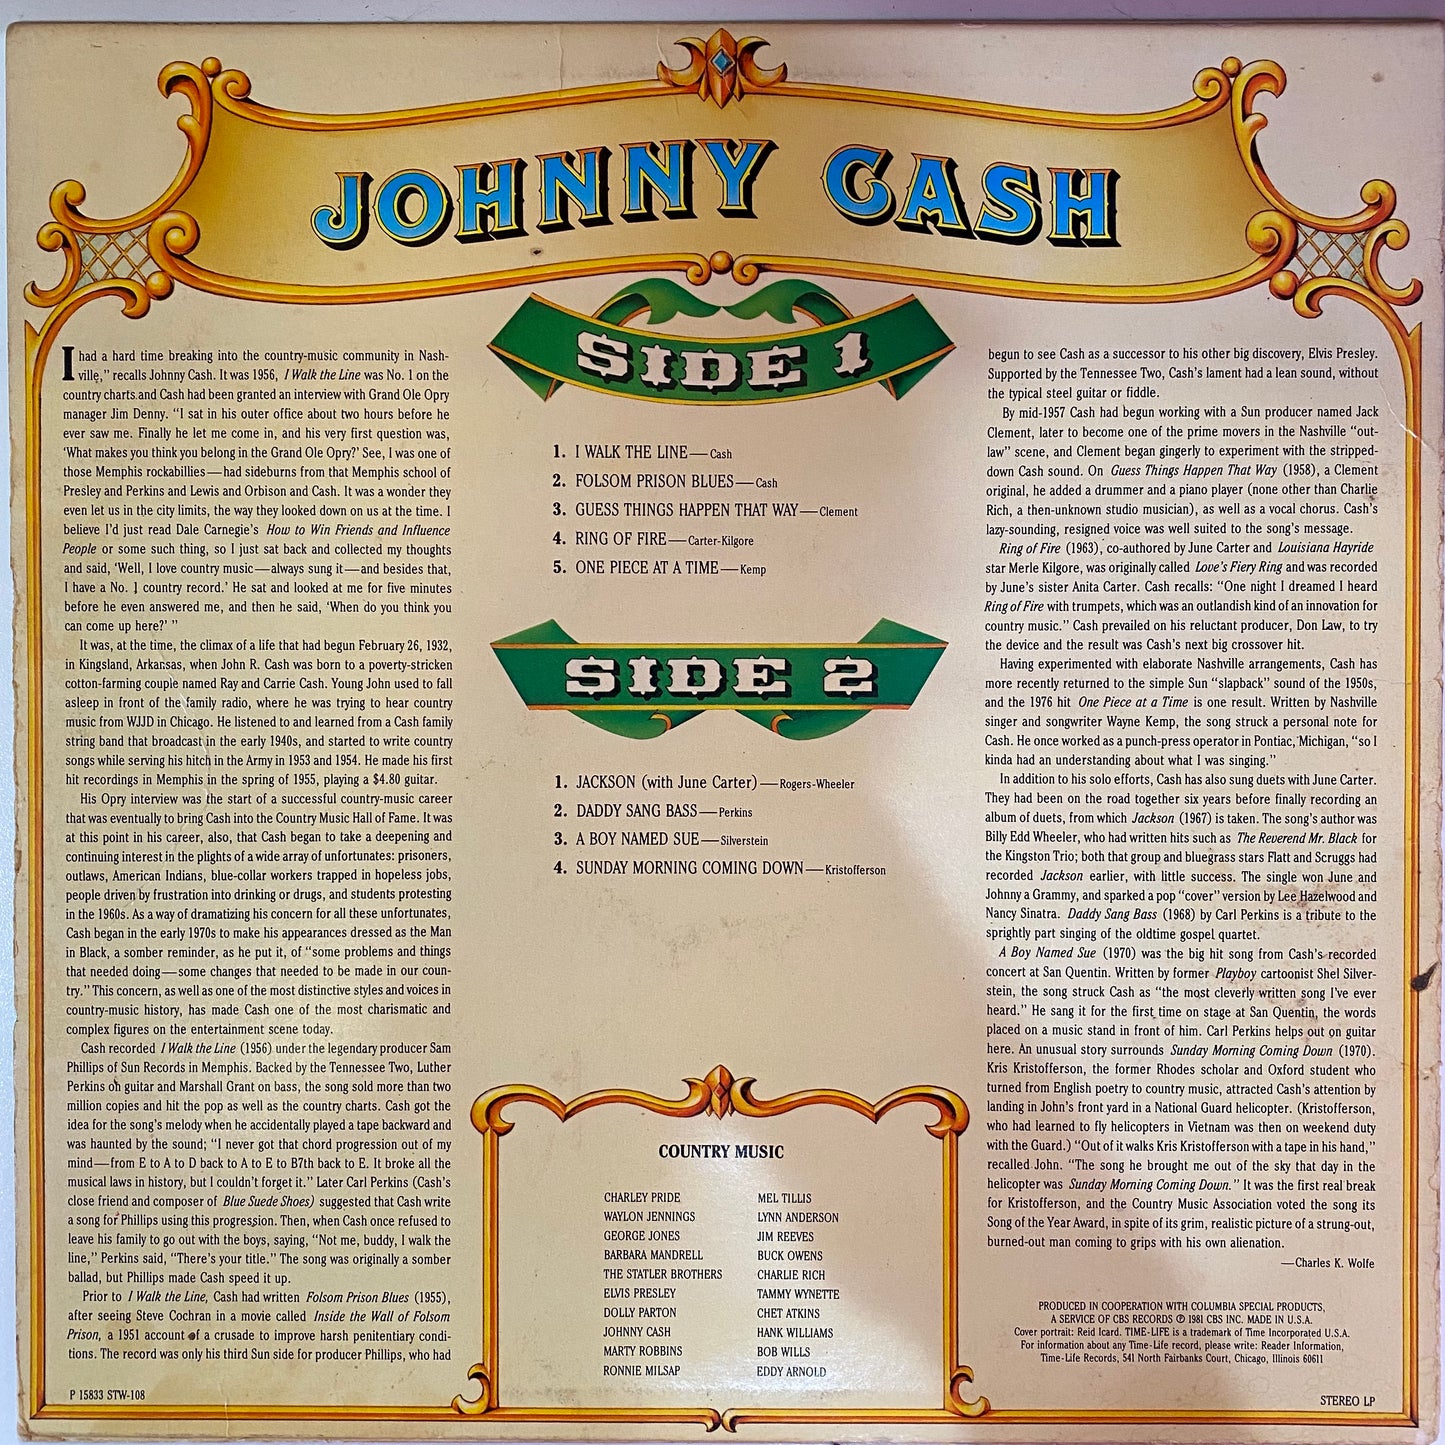 Johnny Cash - Country Music (Vinyl Cover)